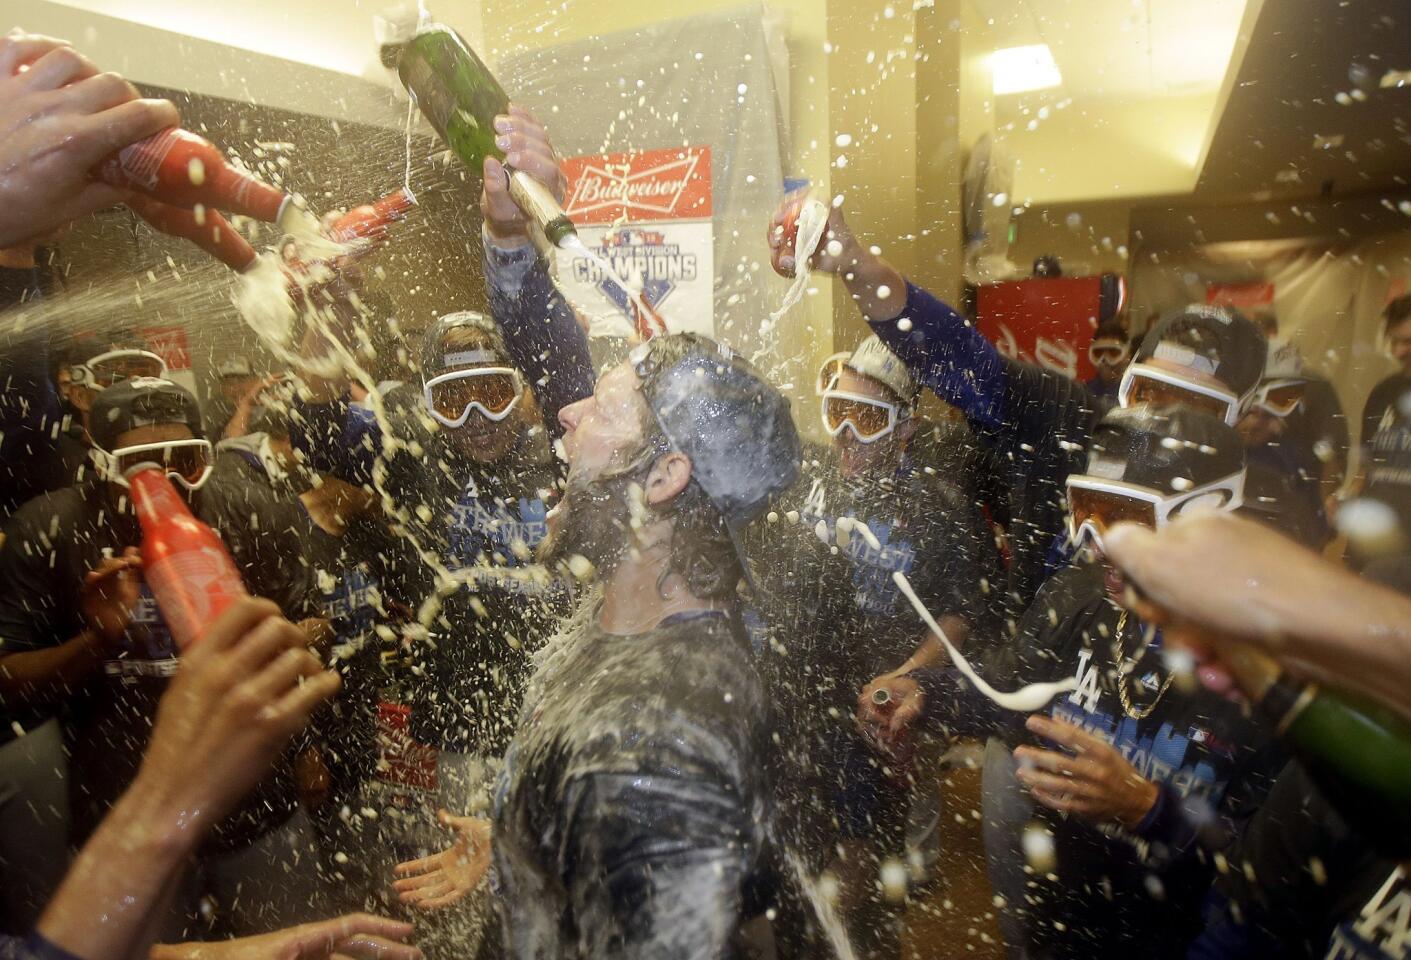 Los Angeles Dodgers pitcher Clayton Kershaw, center, celebrates with teammates in the locker room after the Dodgers beat the San Francisco Giants in a baseball game in San Francisco, Tuesday, Sept. 29, 2015. The Dodgers won 8-0 to clinch the National League West division. (AP Photo/Jeff Chiu)